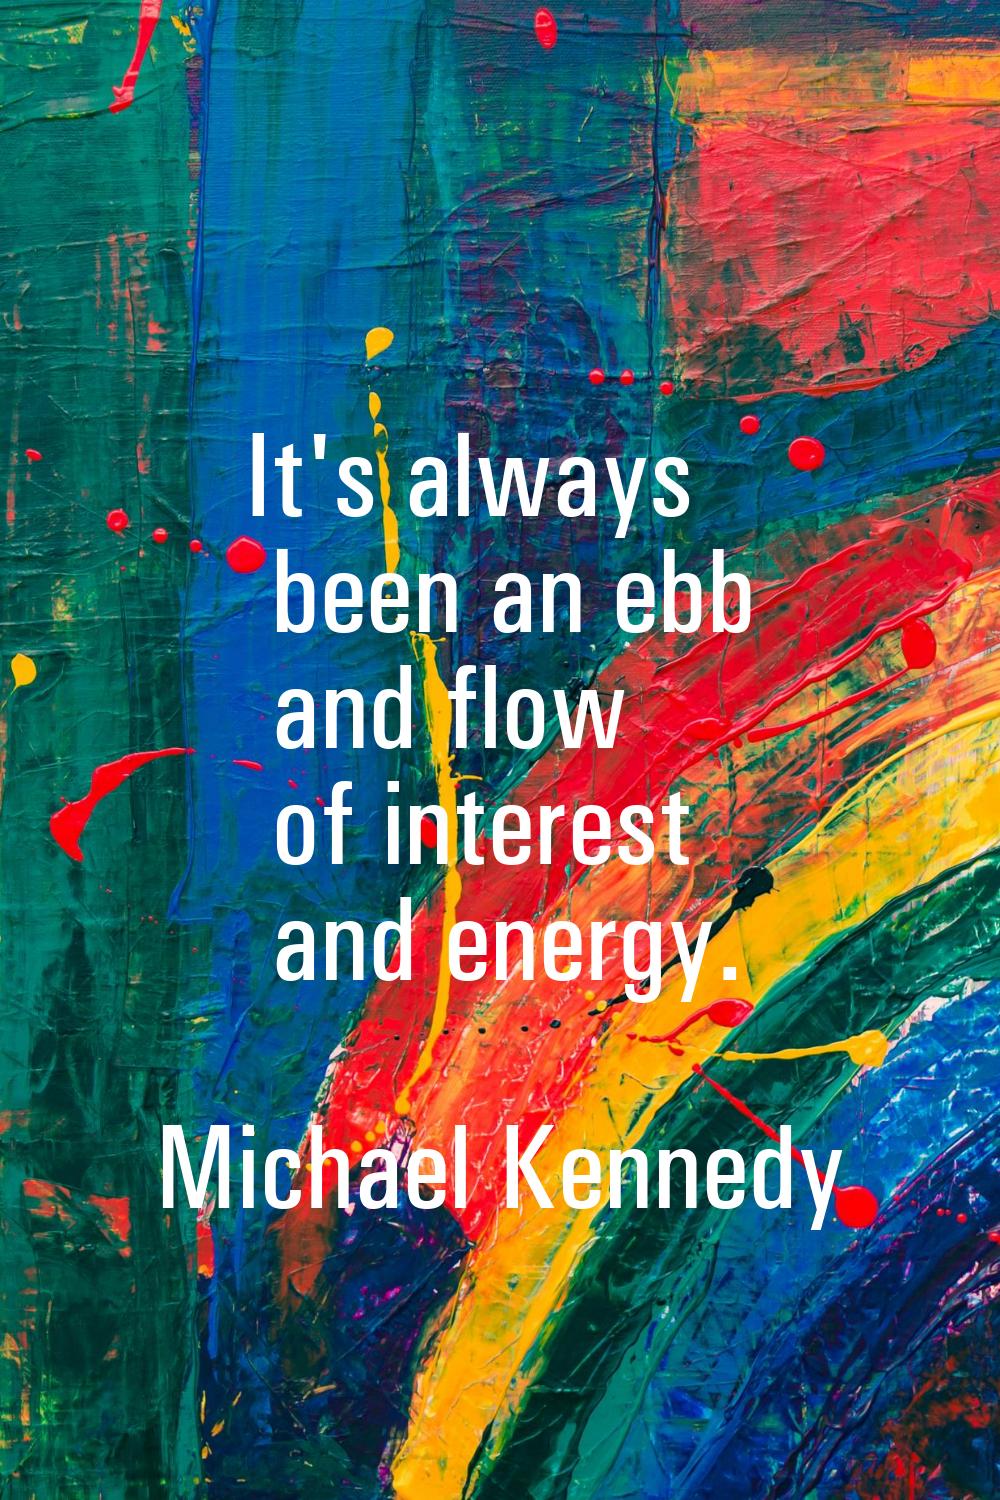 It's always been an ebb and flow of interest and energy.